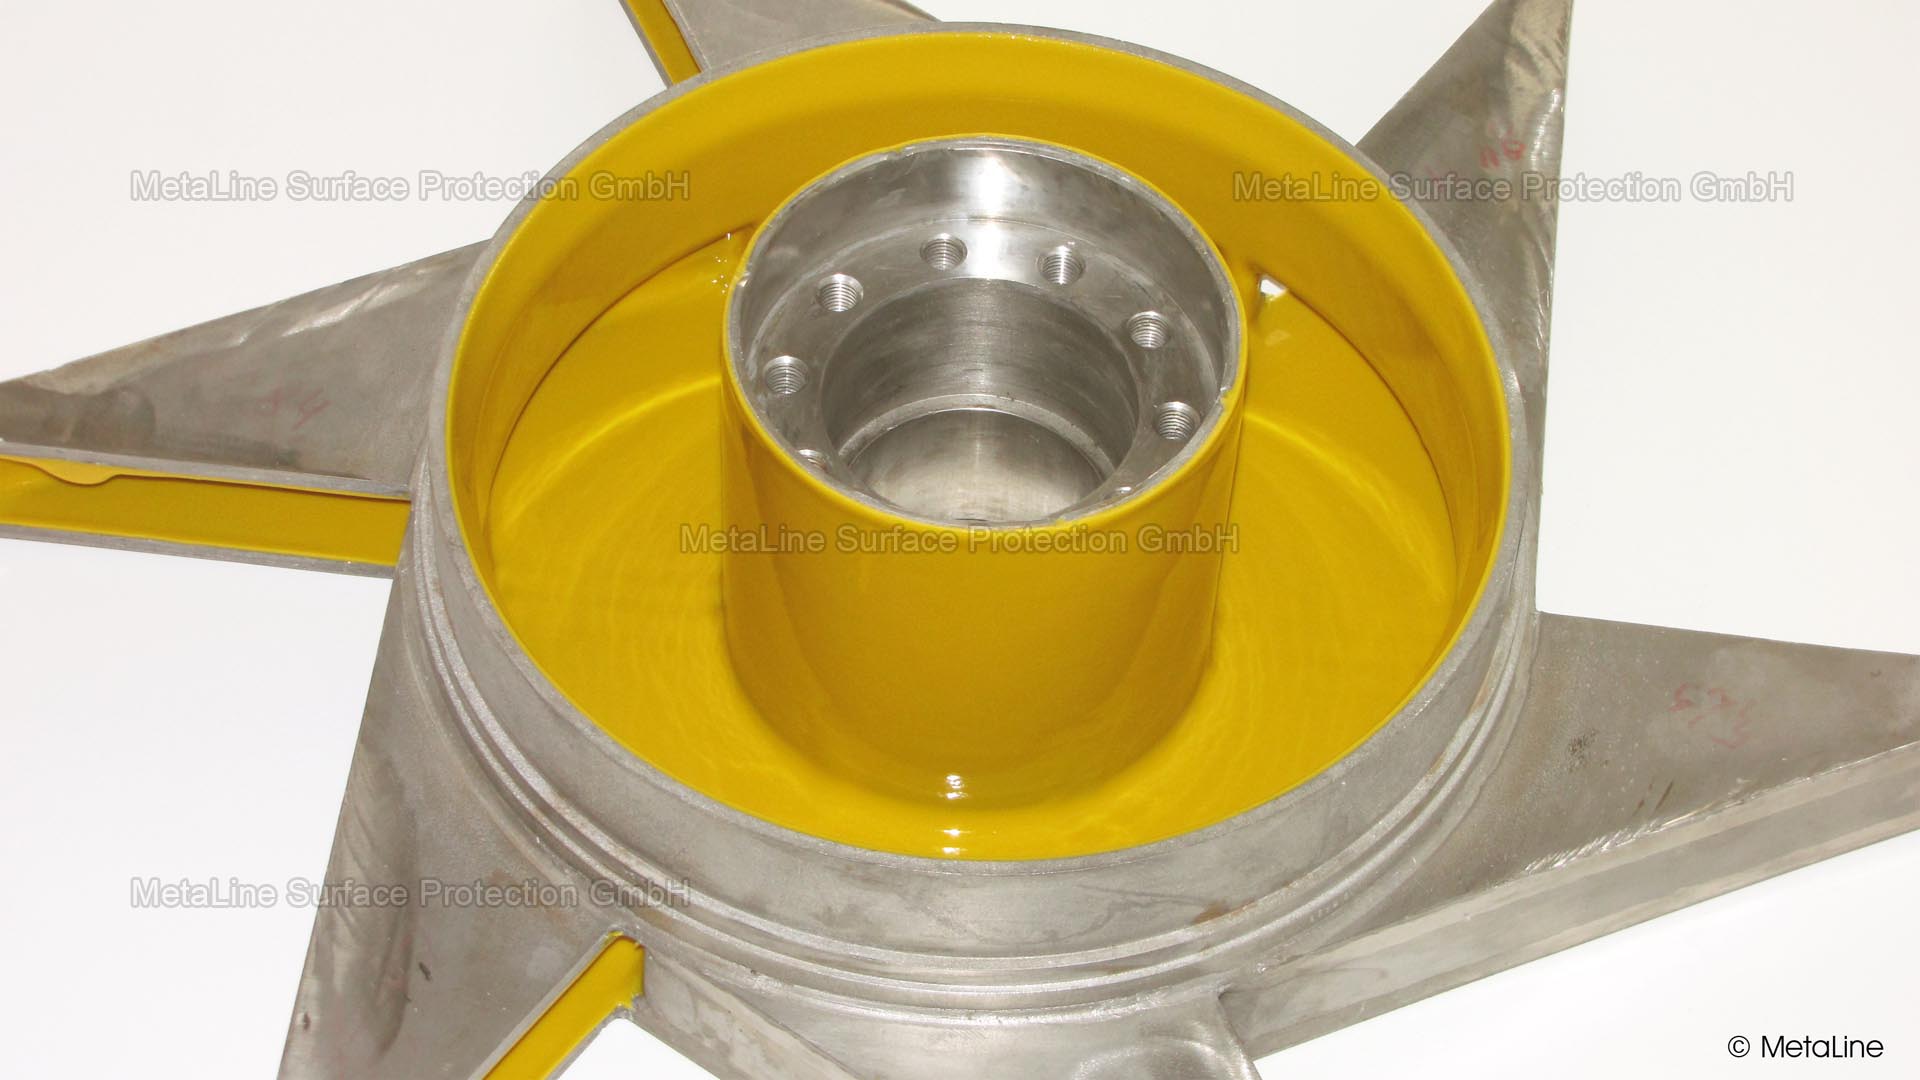 <!-- START: ConditionalContent --><!-- END: ConditionalContent -->   <!-- START: ConditionalContent --> mixer; agitator; dispenser; wear; corrosion; abrasion; rubber coating; repair; wear-resistant; coating; shaft; blade mixer; chemical protection <!-- END: ConditionalContent -->   <!-- START: ConditionalContent --><!-- END: ConditionalContent -->   <!-- START: ConditionalContent --><!-- END: ConditionalContent -->